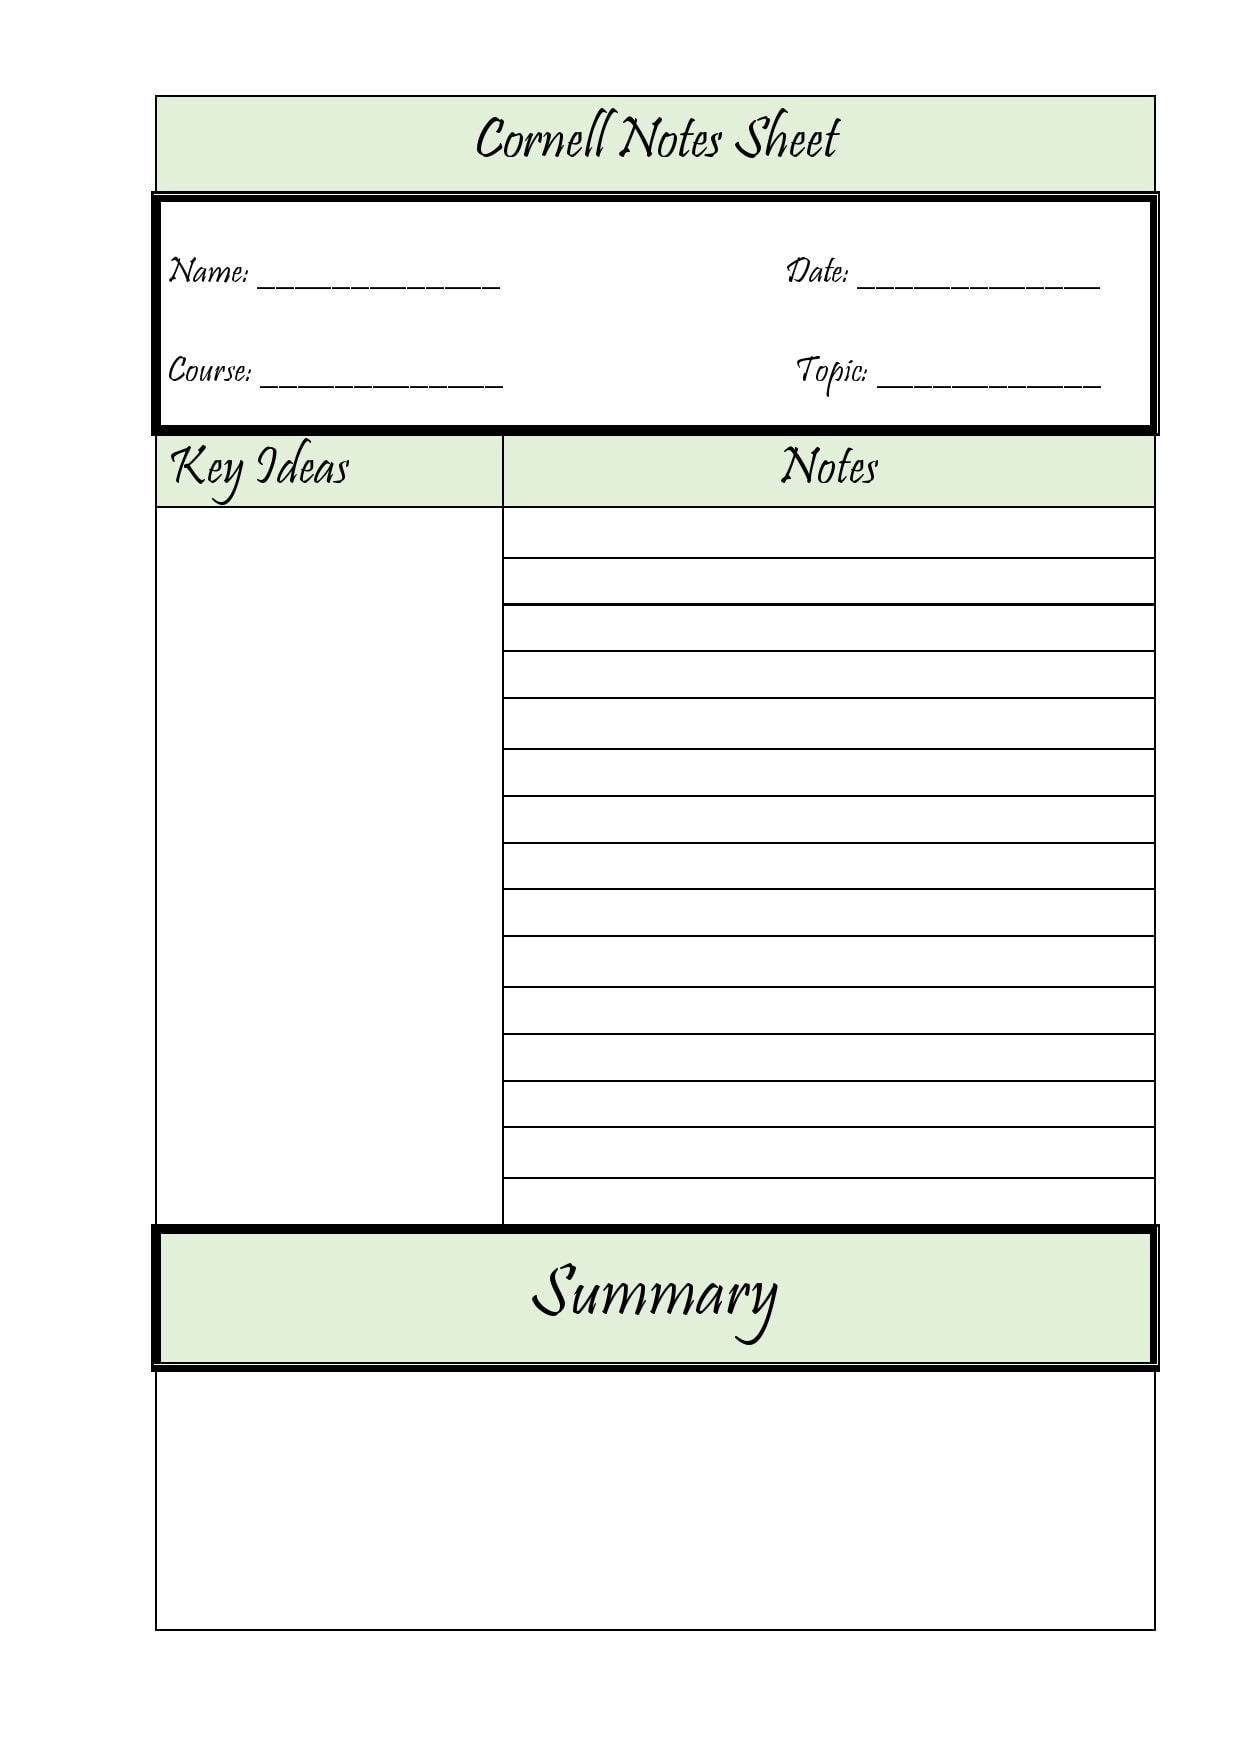 22 Printable Cornell Notes Templates [Free] - TemplateArchive Intended For Cornell Note Template Word